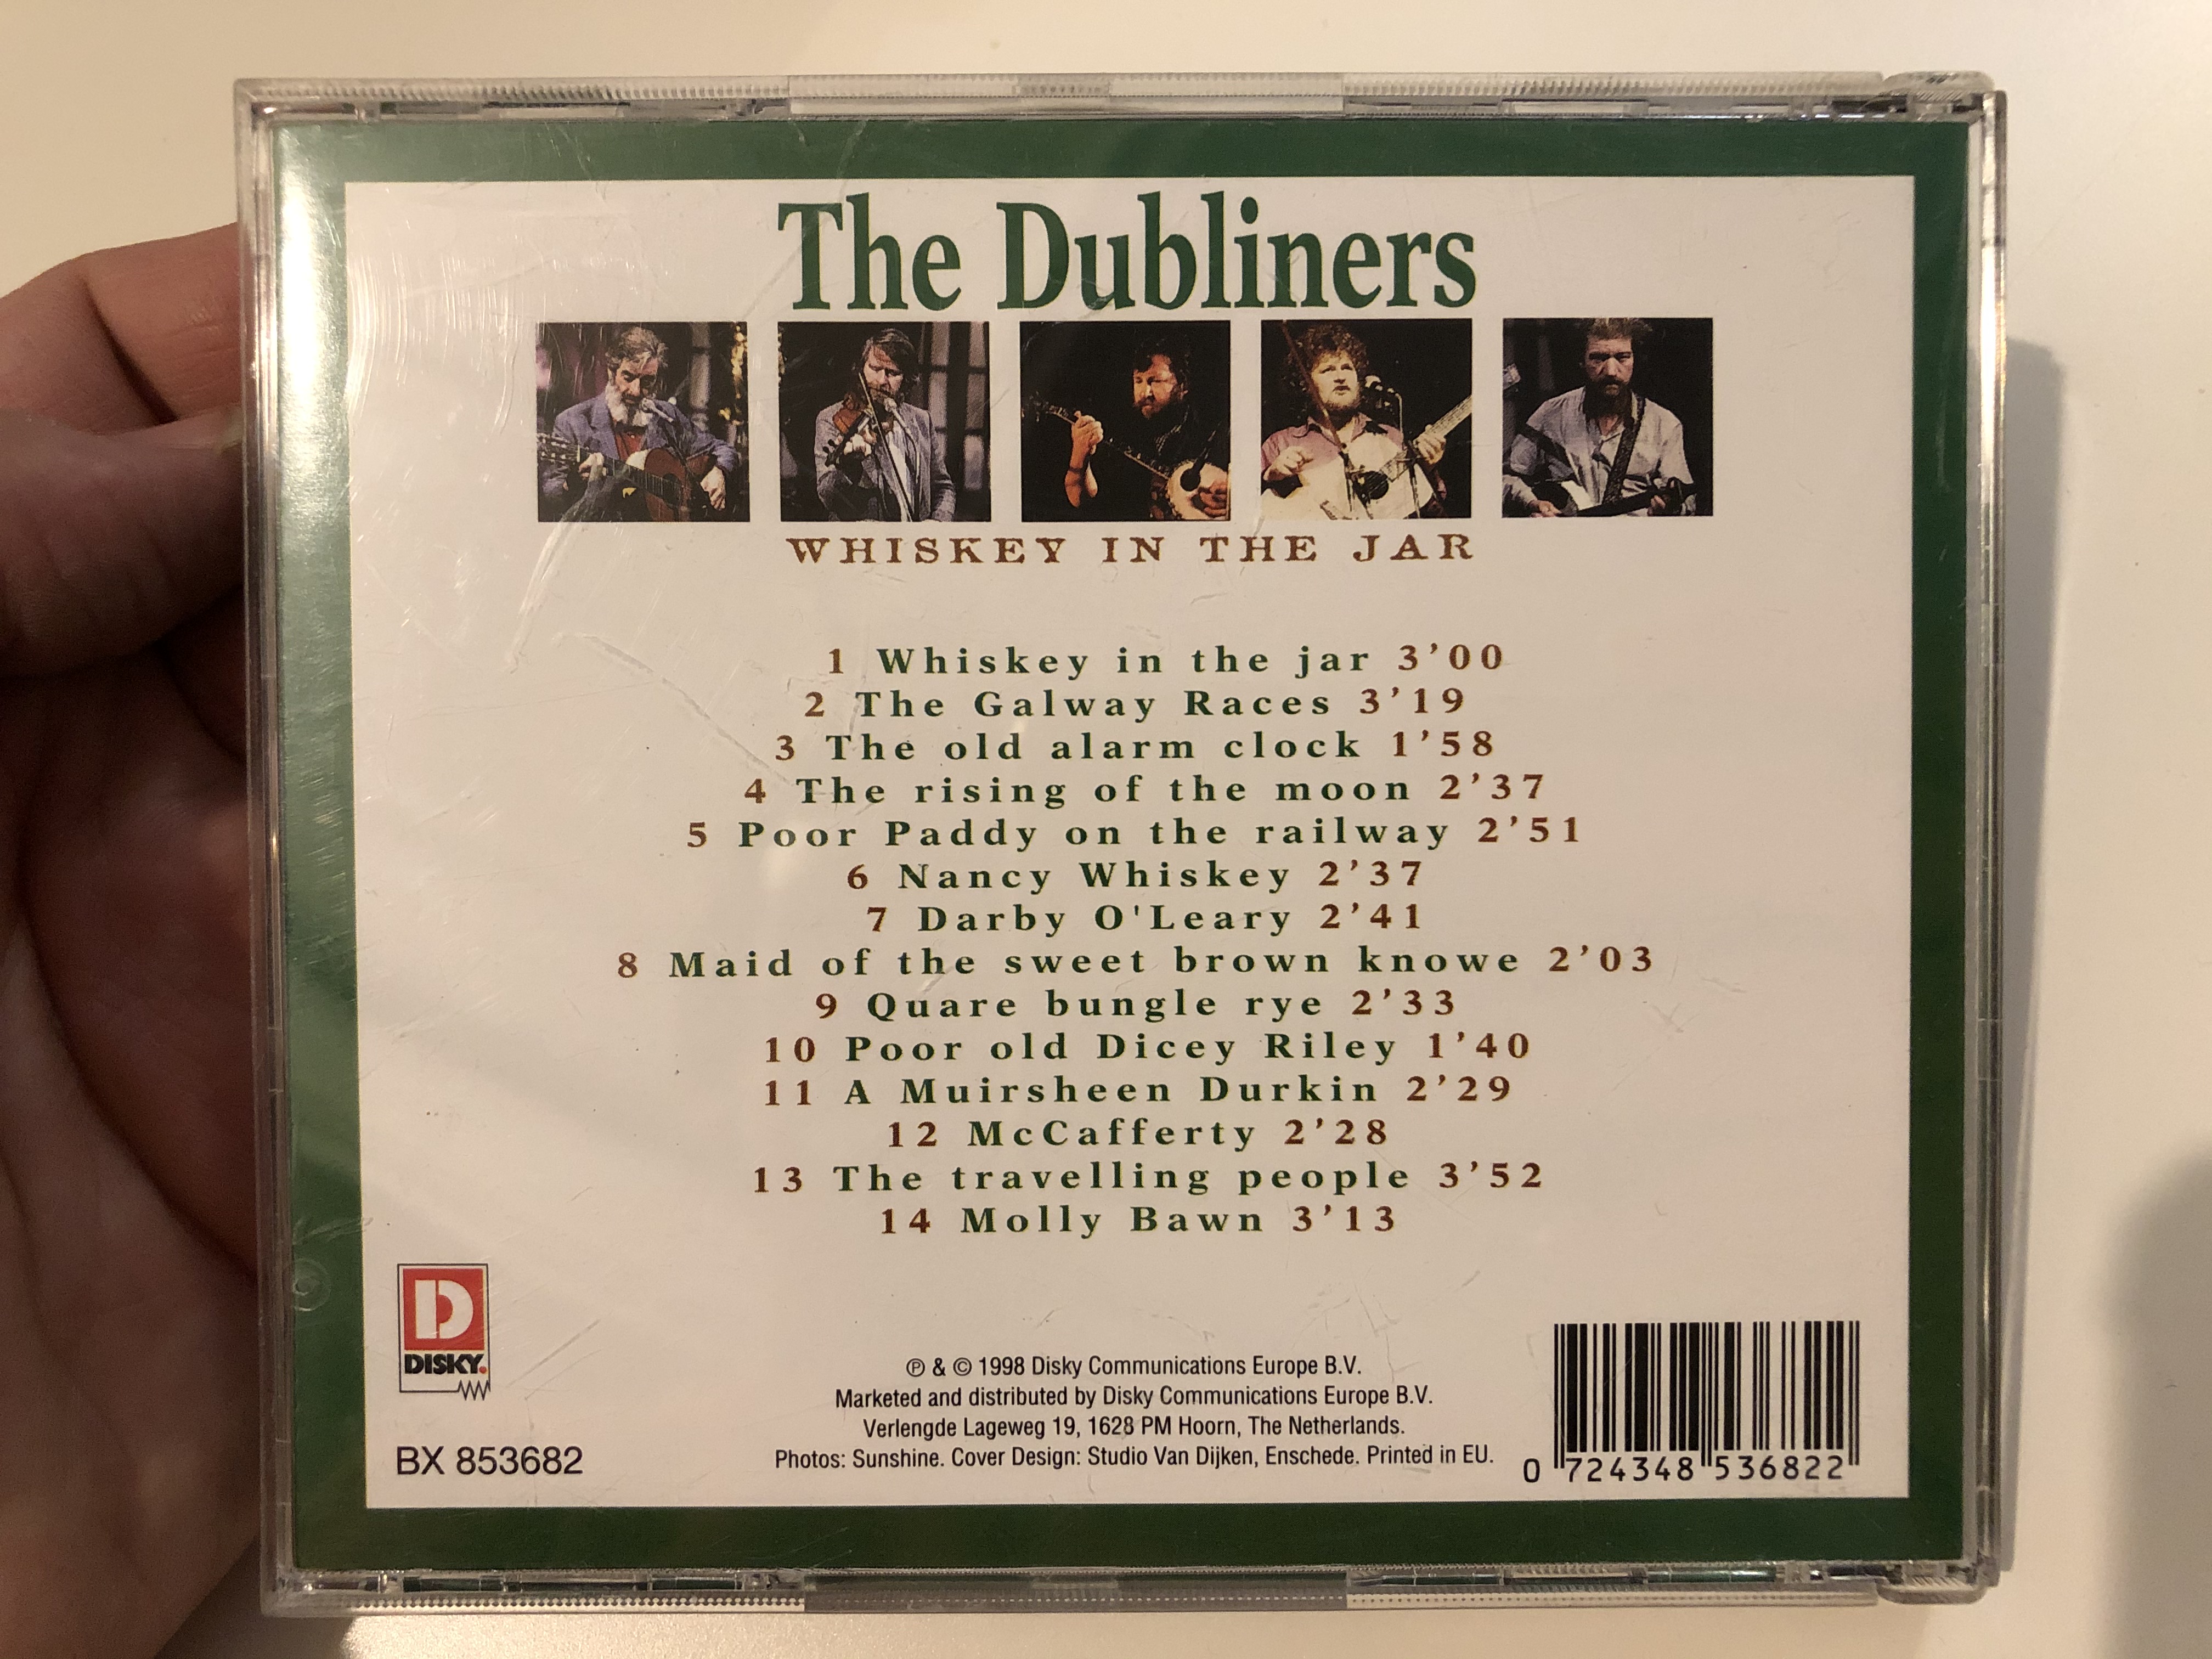 the-dubliners-whiskey-in-the-jar-whiskey-on-a-sunday-the-dundee-weaver-i-wish-i-were-back-in-liverpool-seven-drunken-nights-disky-audio-cd-1998-bx-853682-2-.jpg